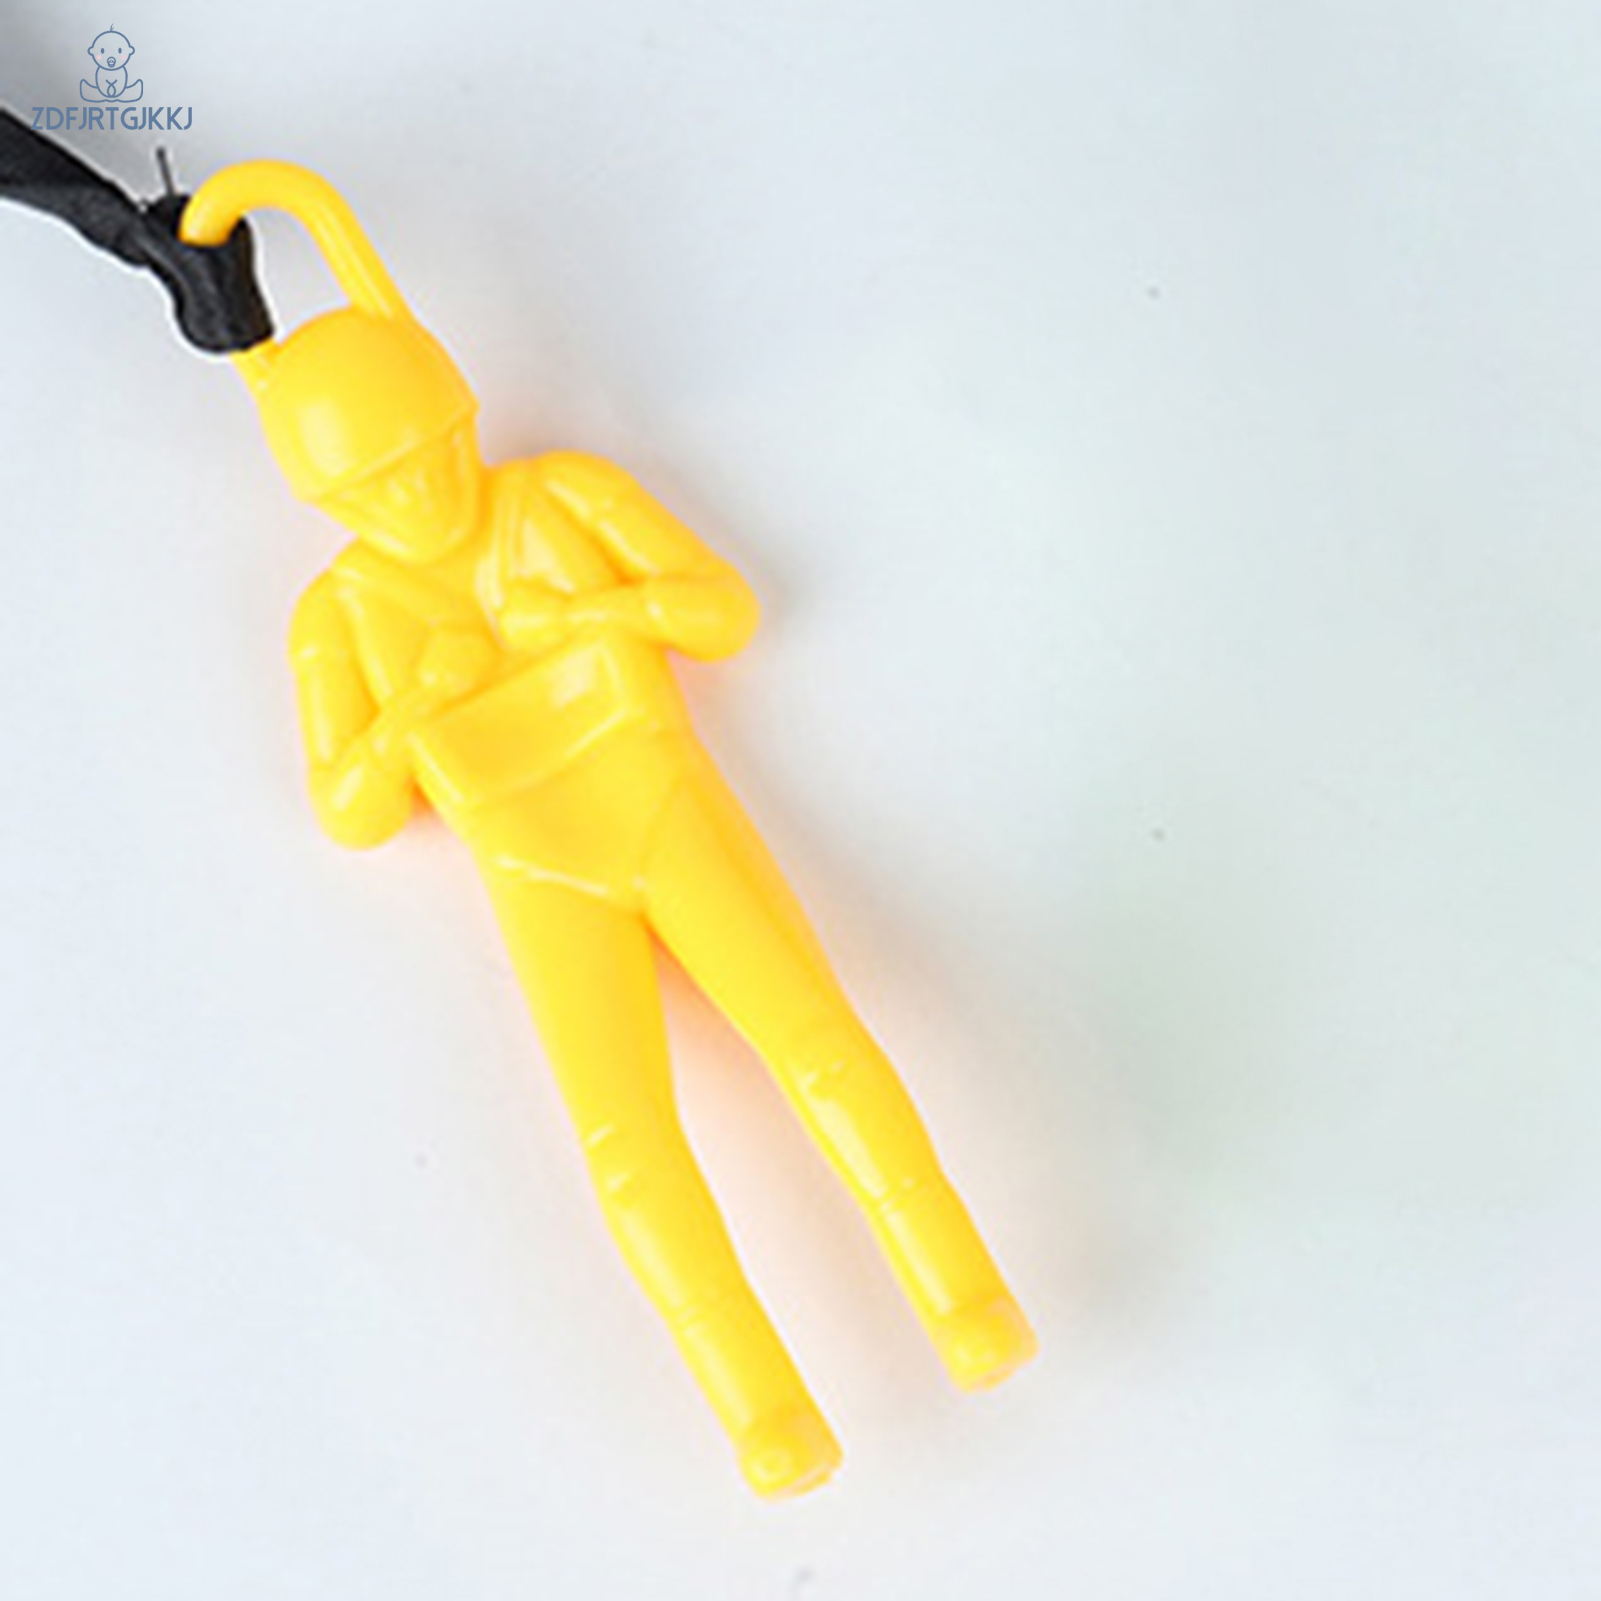 Hand-Throwing Toy Parachute Men Fun and Entertaining Yellow Parachute Toy